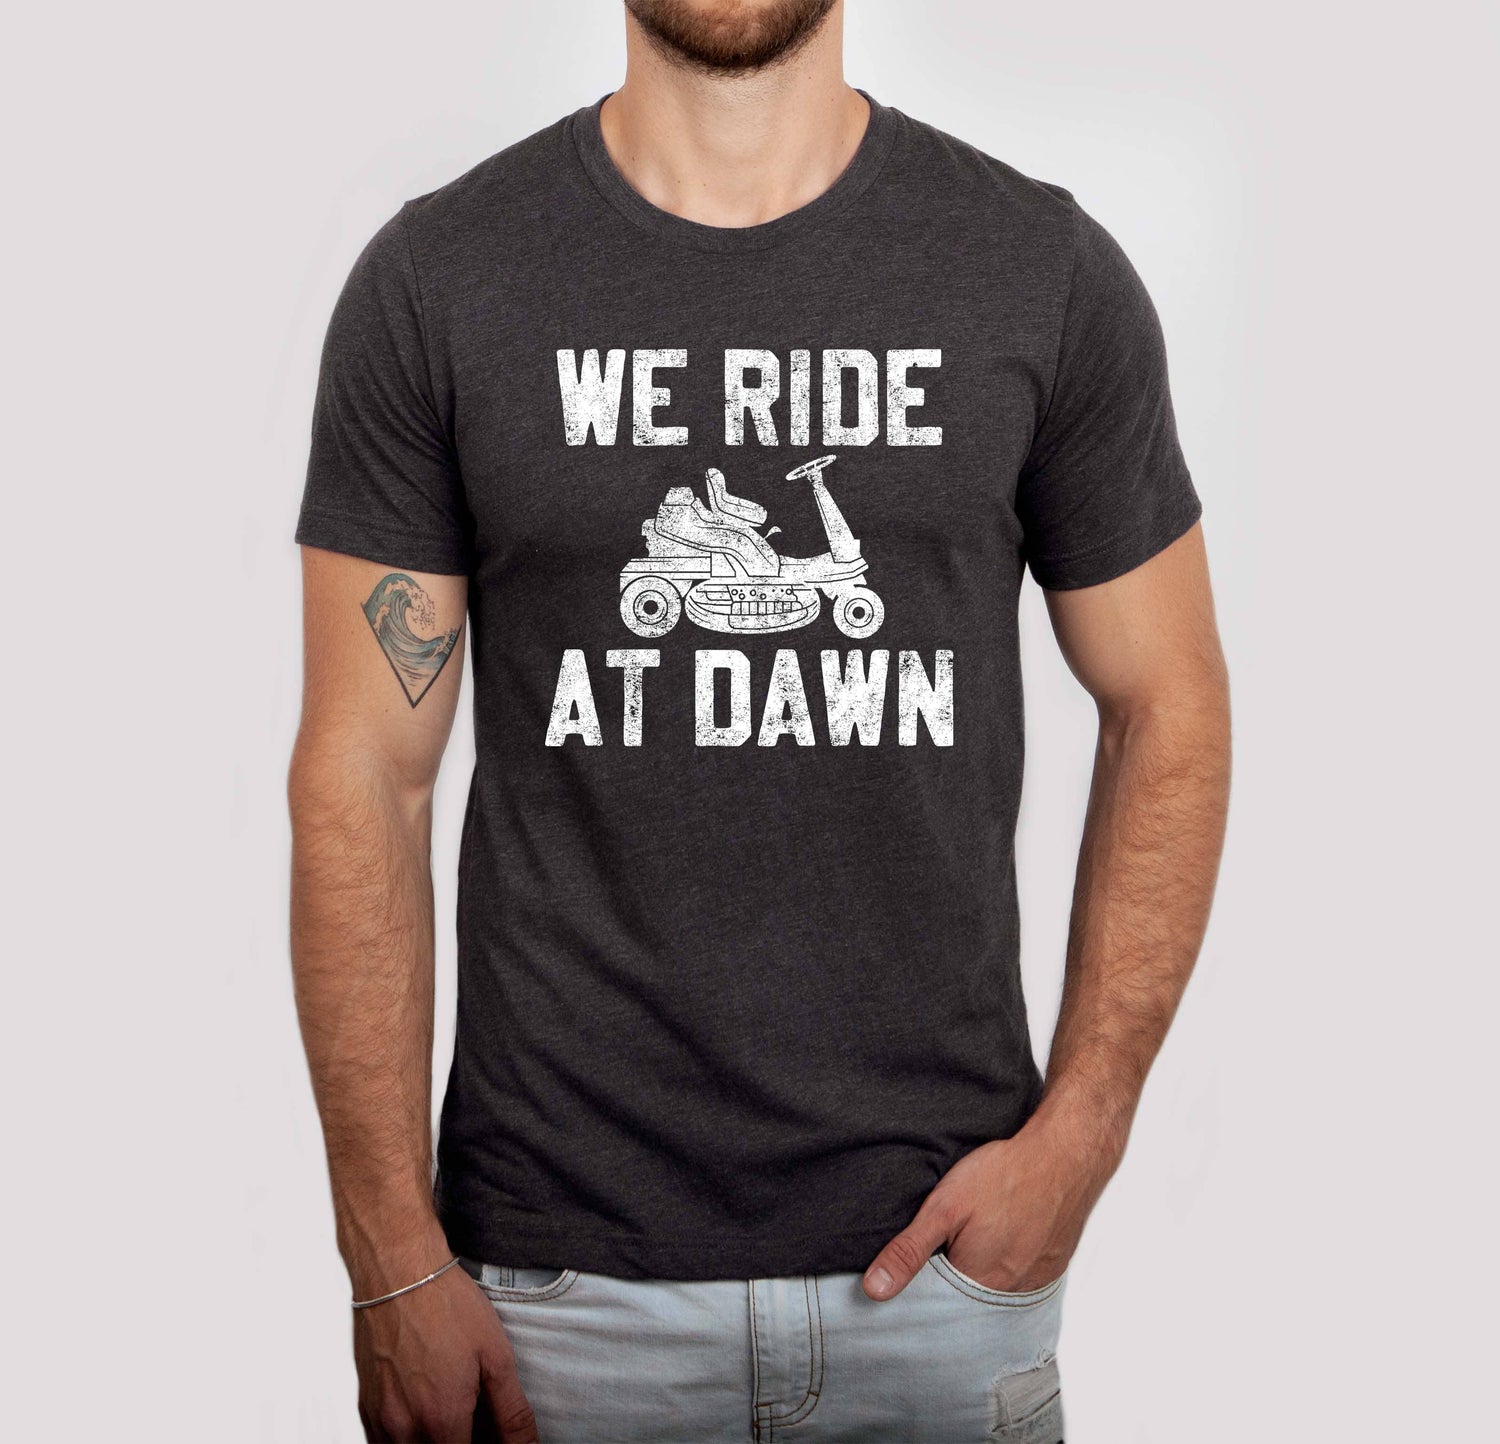 We Ride at Dawn Men's Shirt, Father's Day Tee, Funny Tee: 2X-Large - Storm and Sky Shoppe